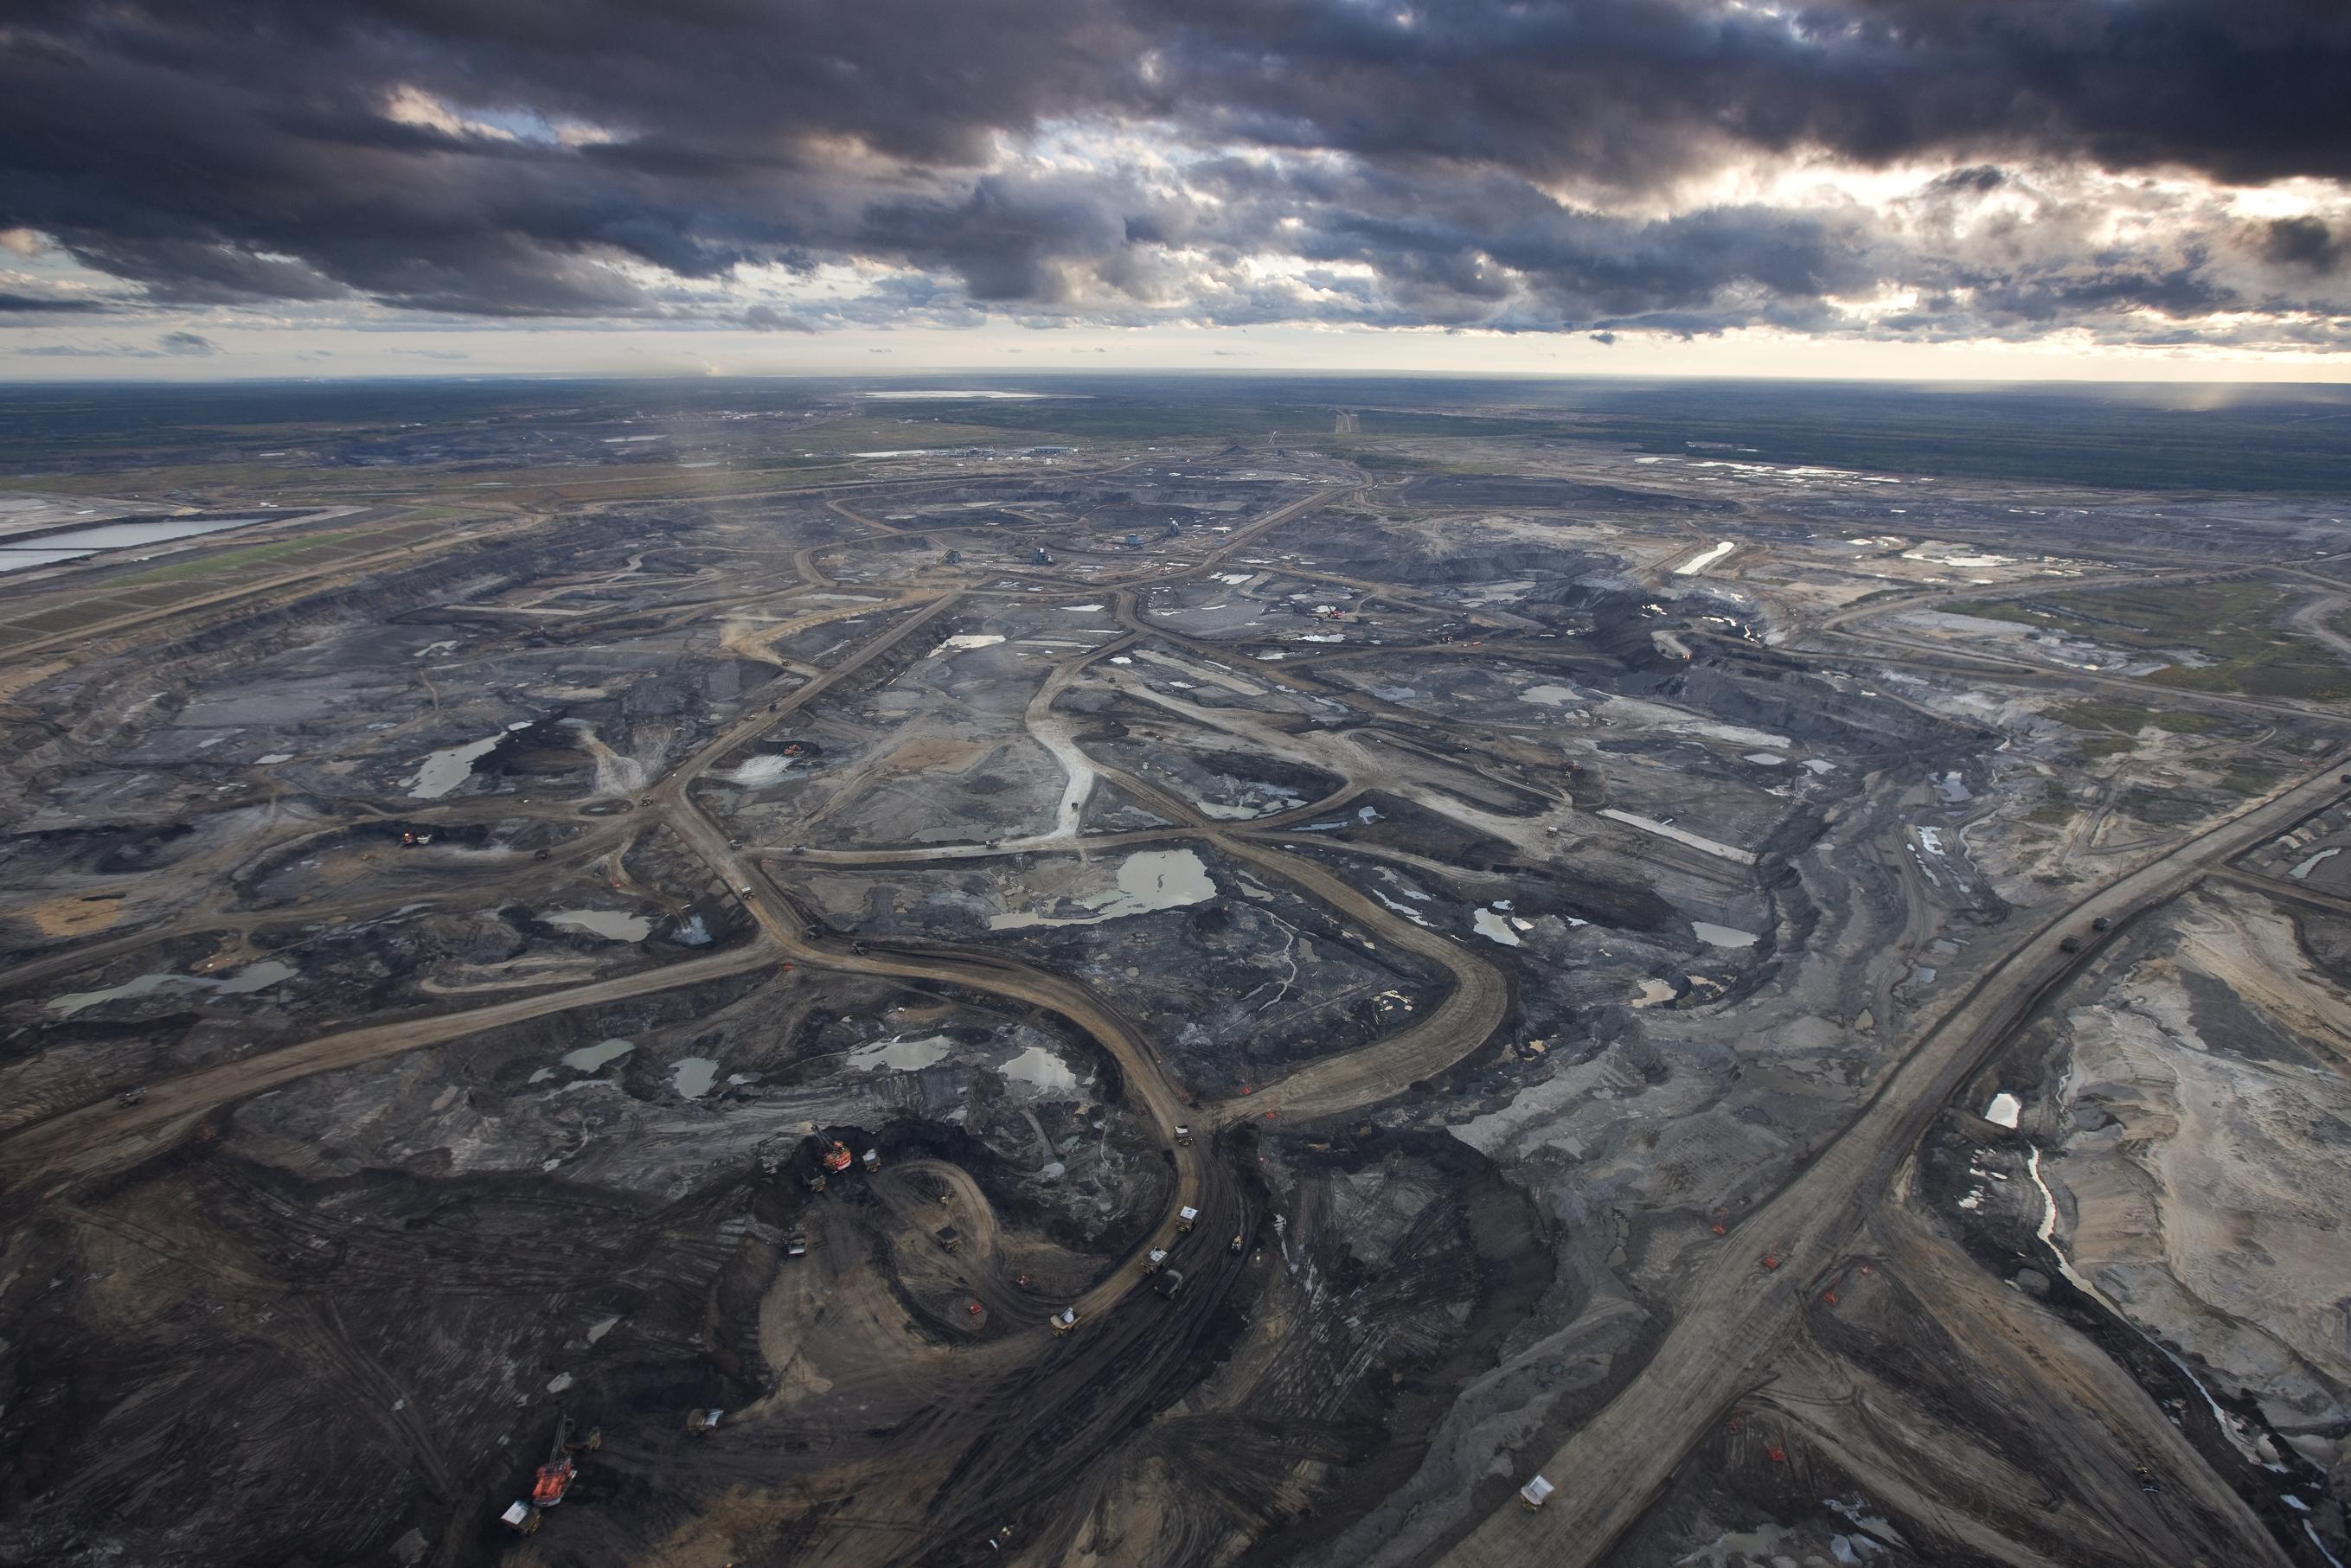 An overhead image showing an oil sands operation